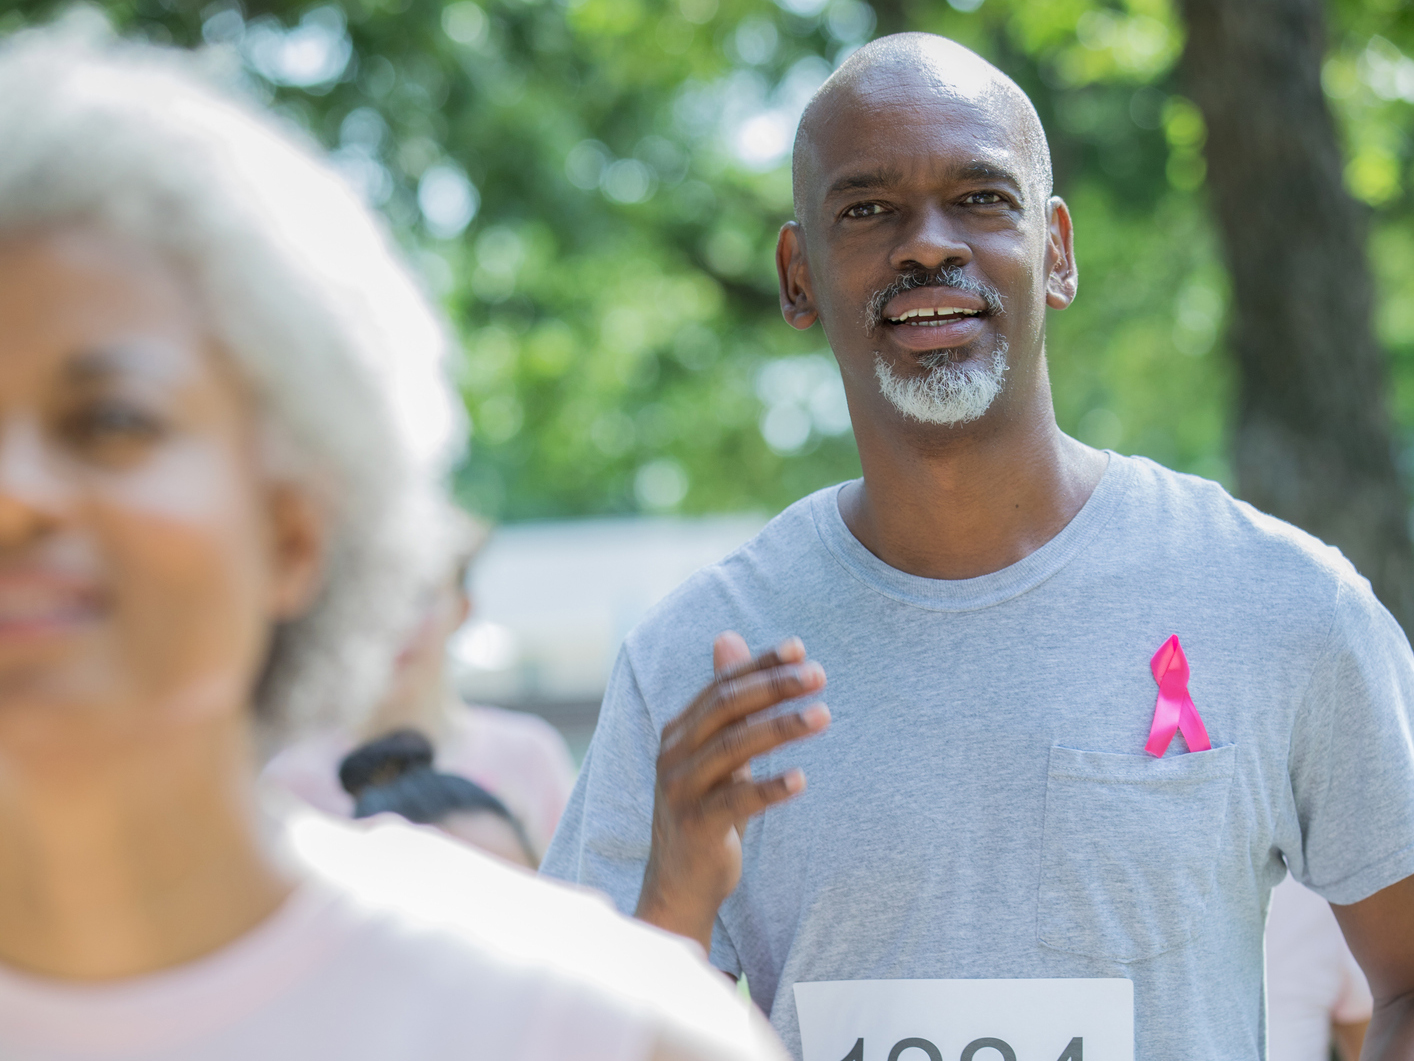 What every man needs to know about his breast cancer risk